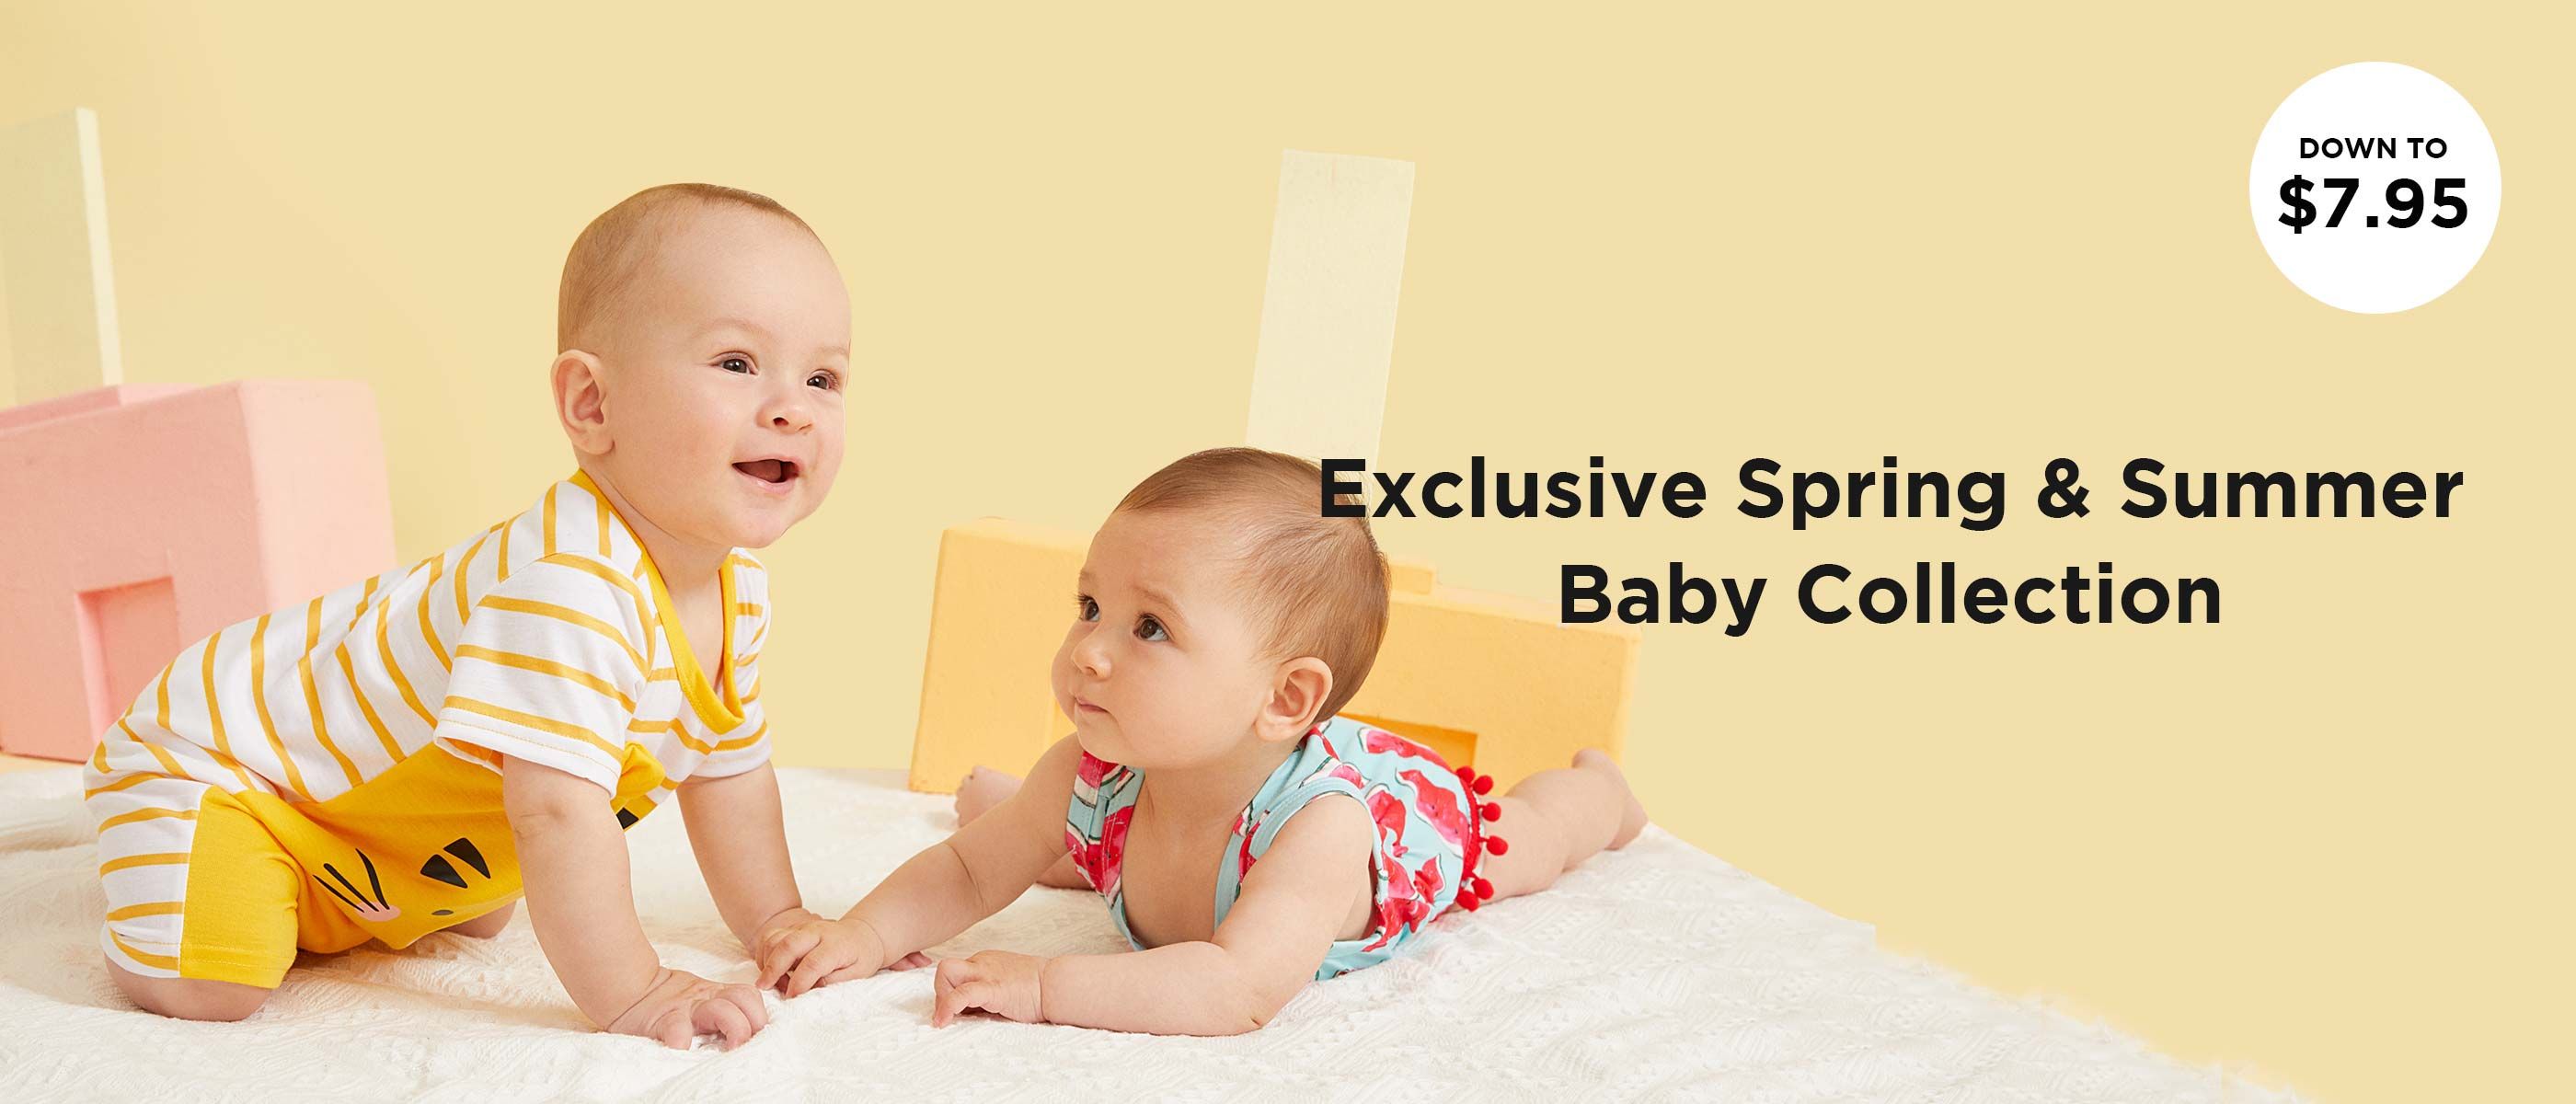 Exclusive Spring & Summer Baby Collection